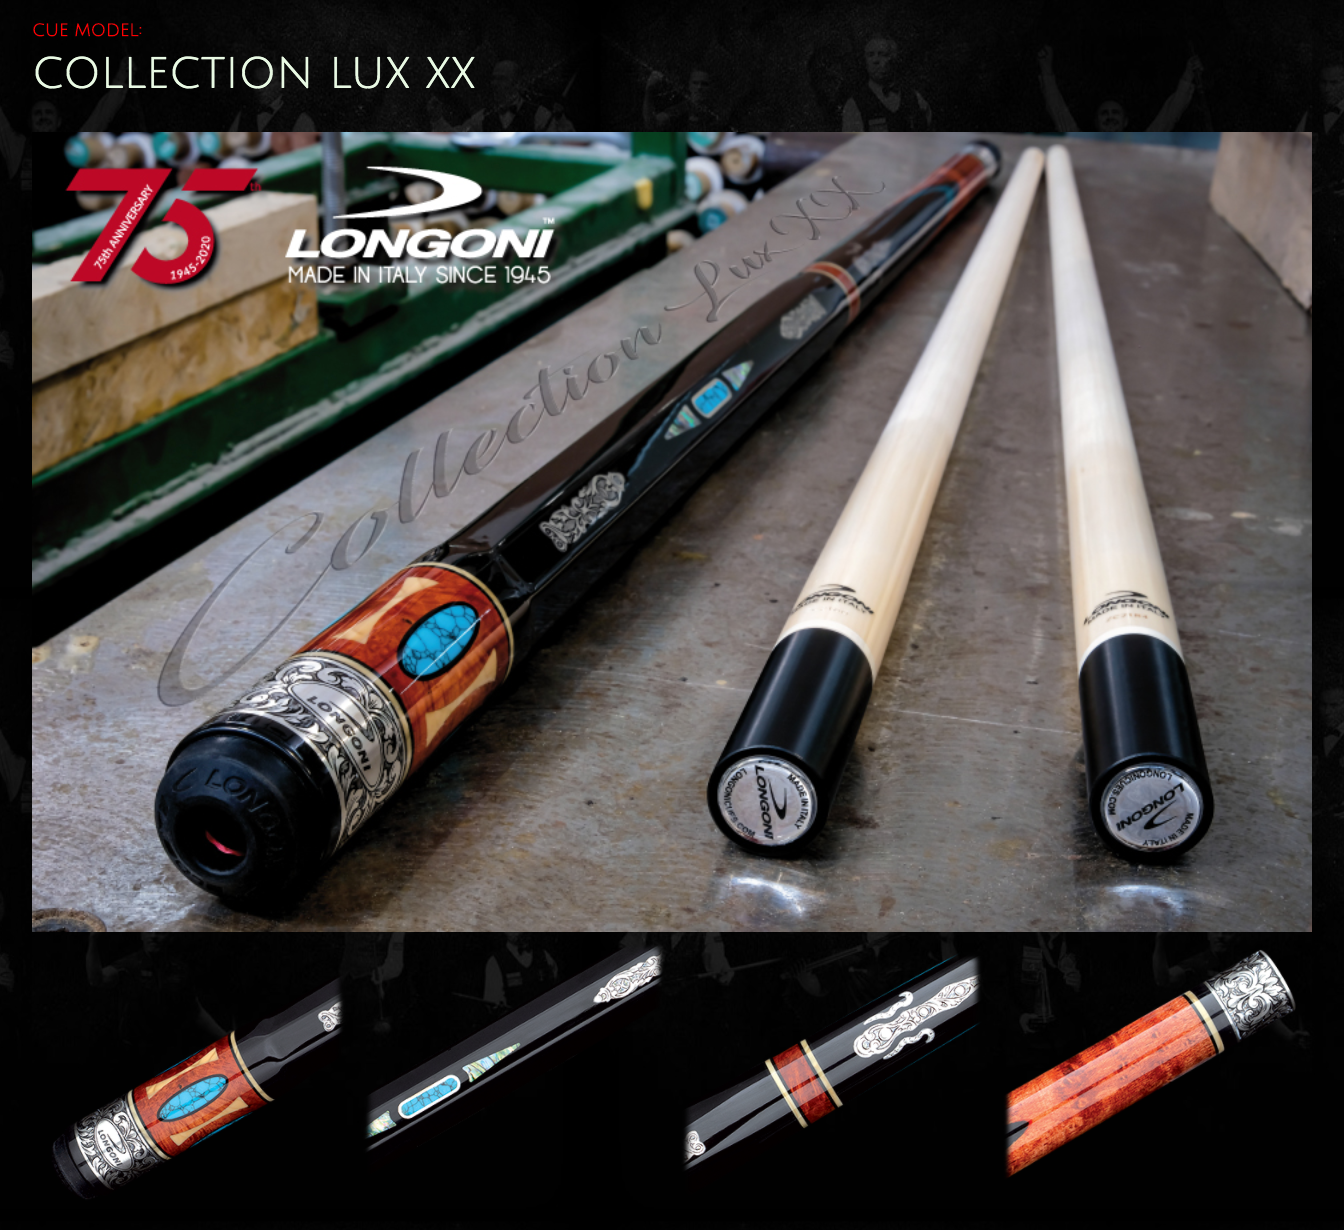  Collection Lux 